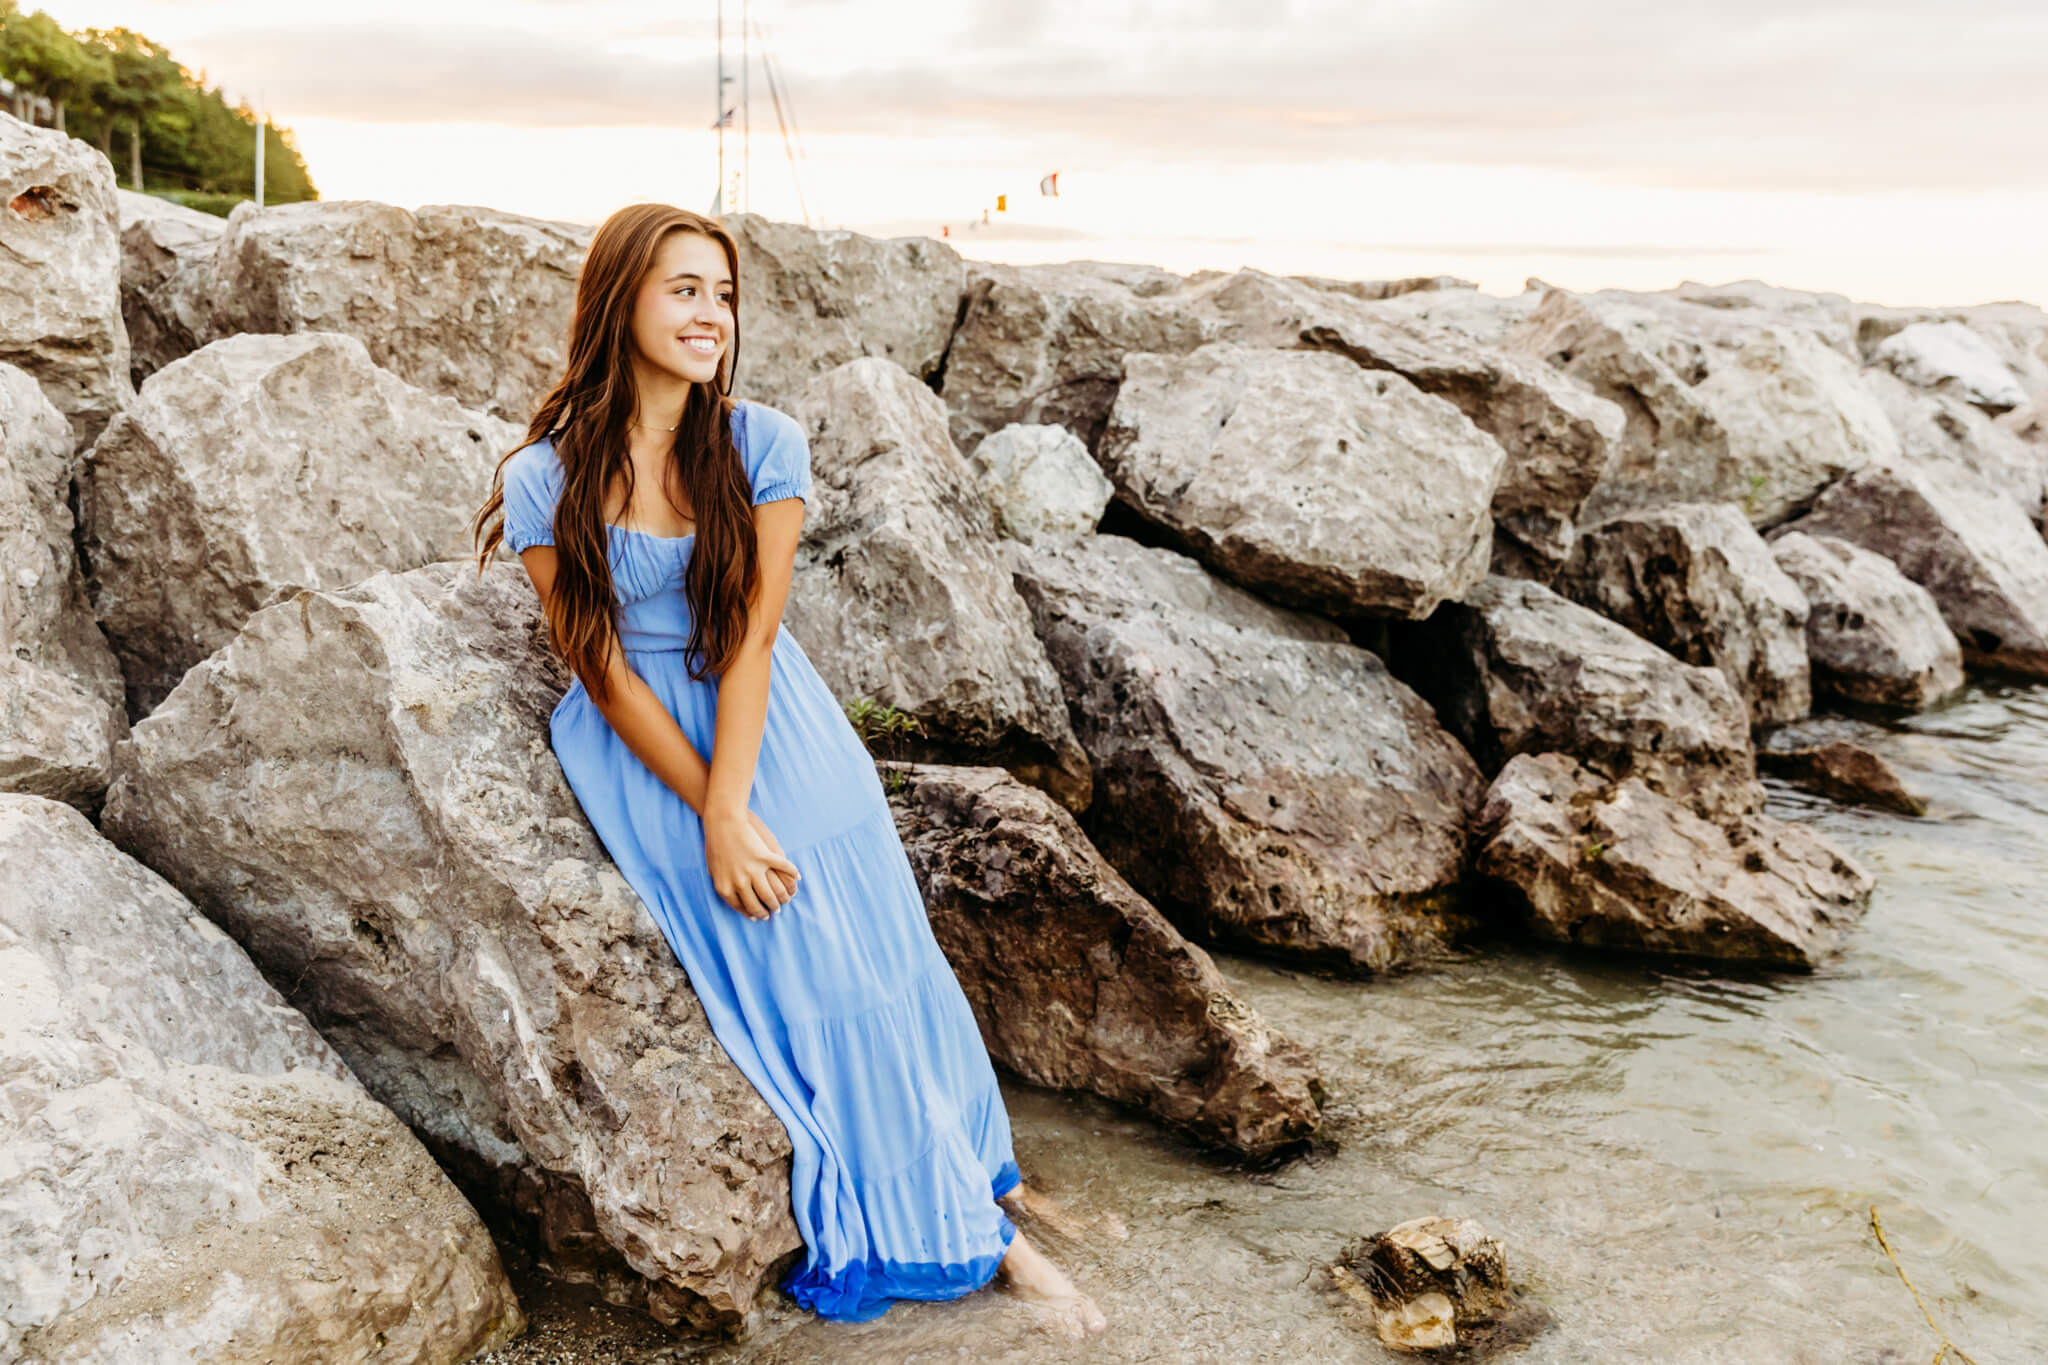 brunette teenage girl in a light blue dress sitting on a rocky shoreline with her feet in the water